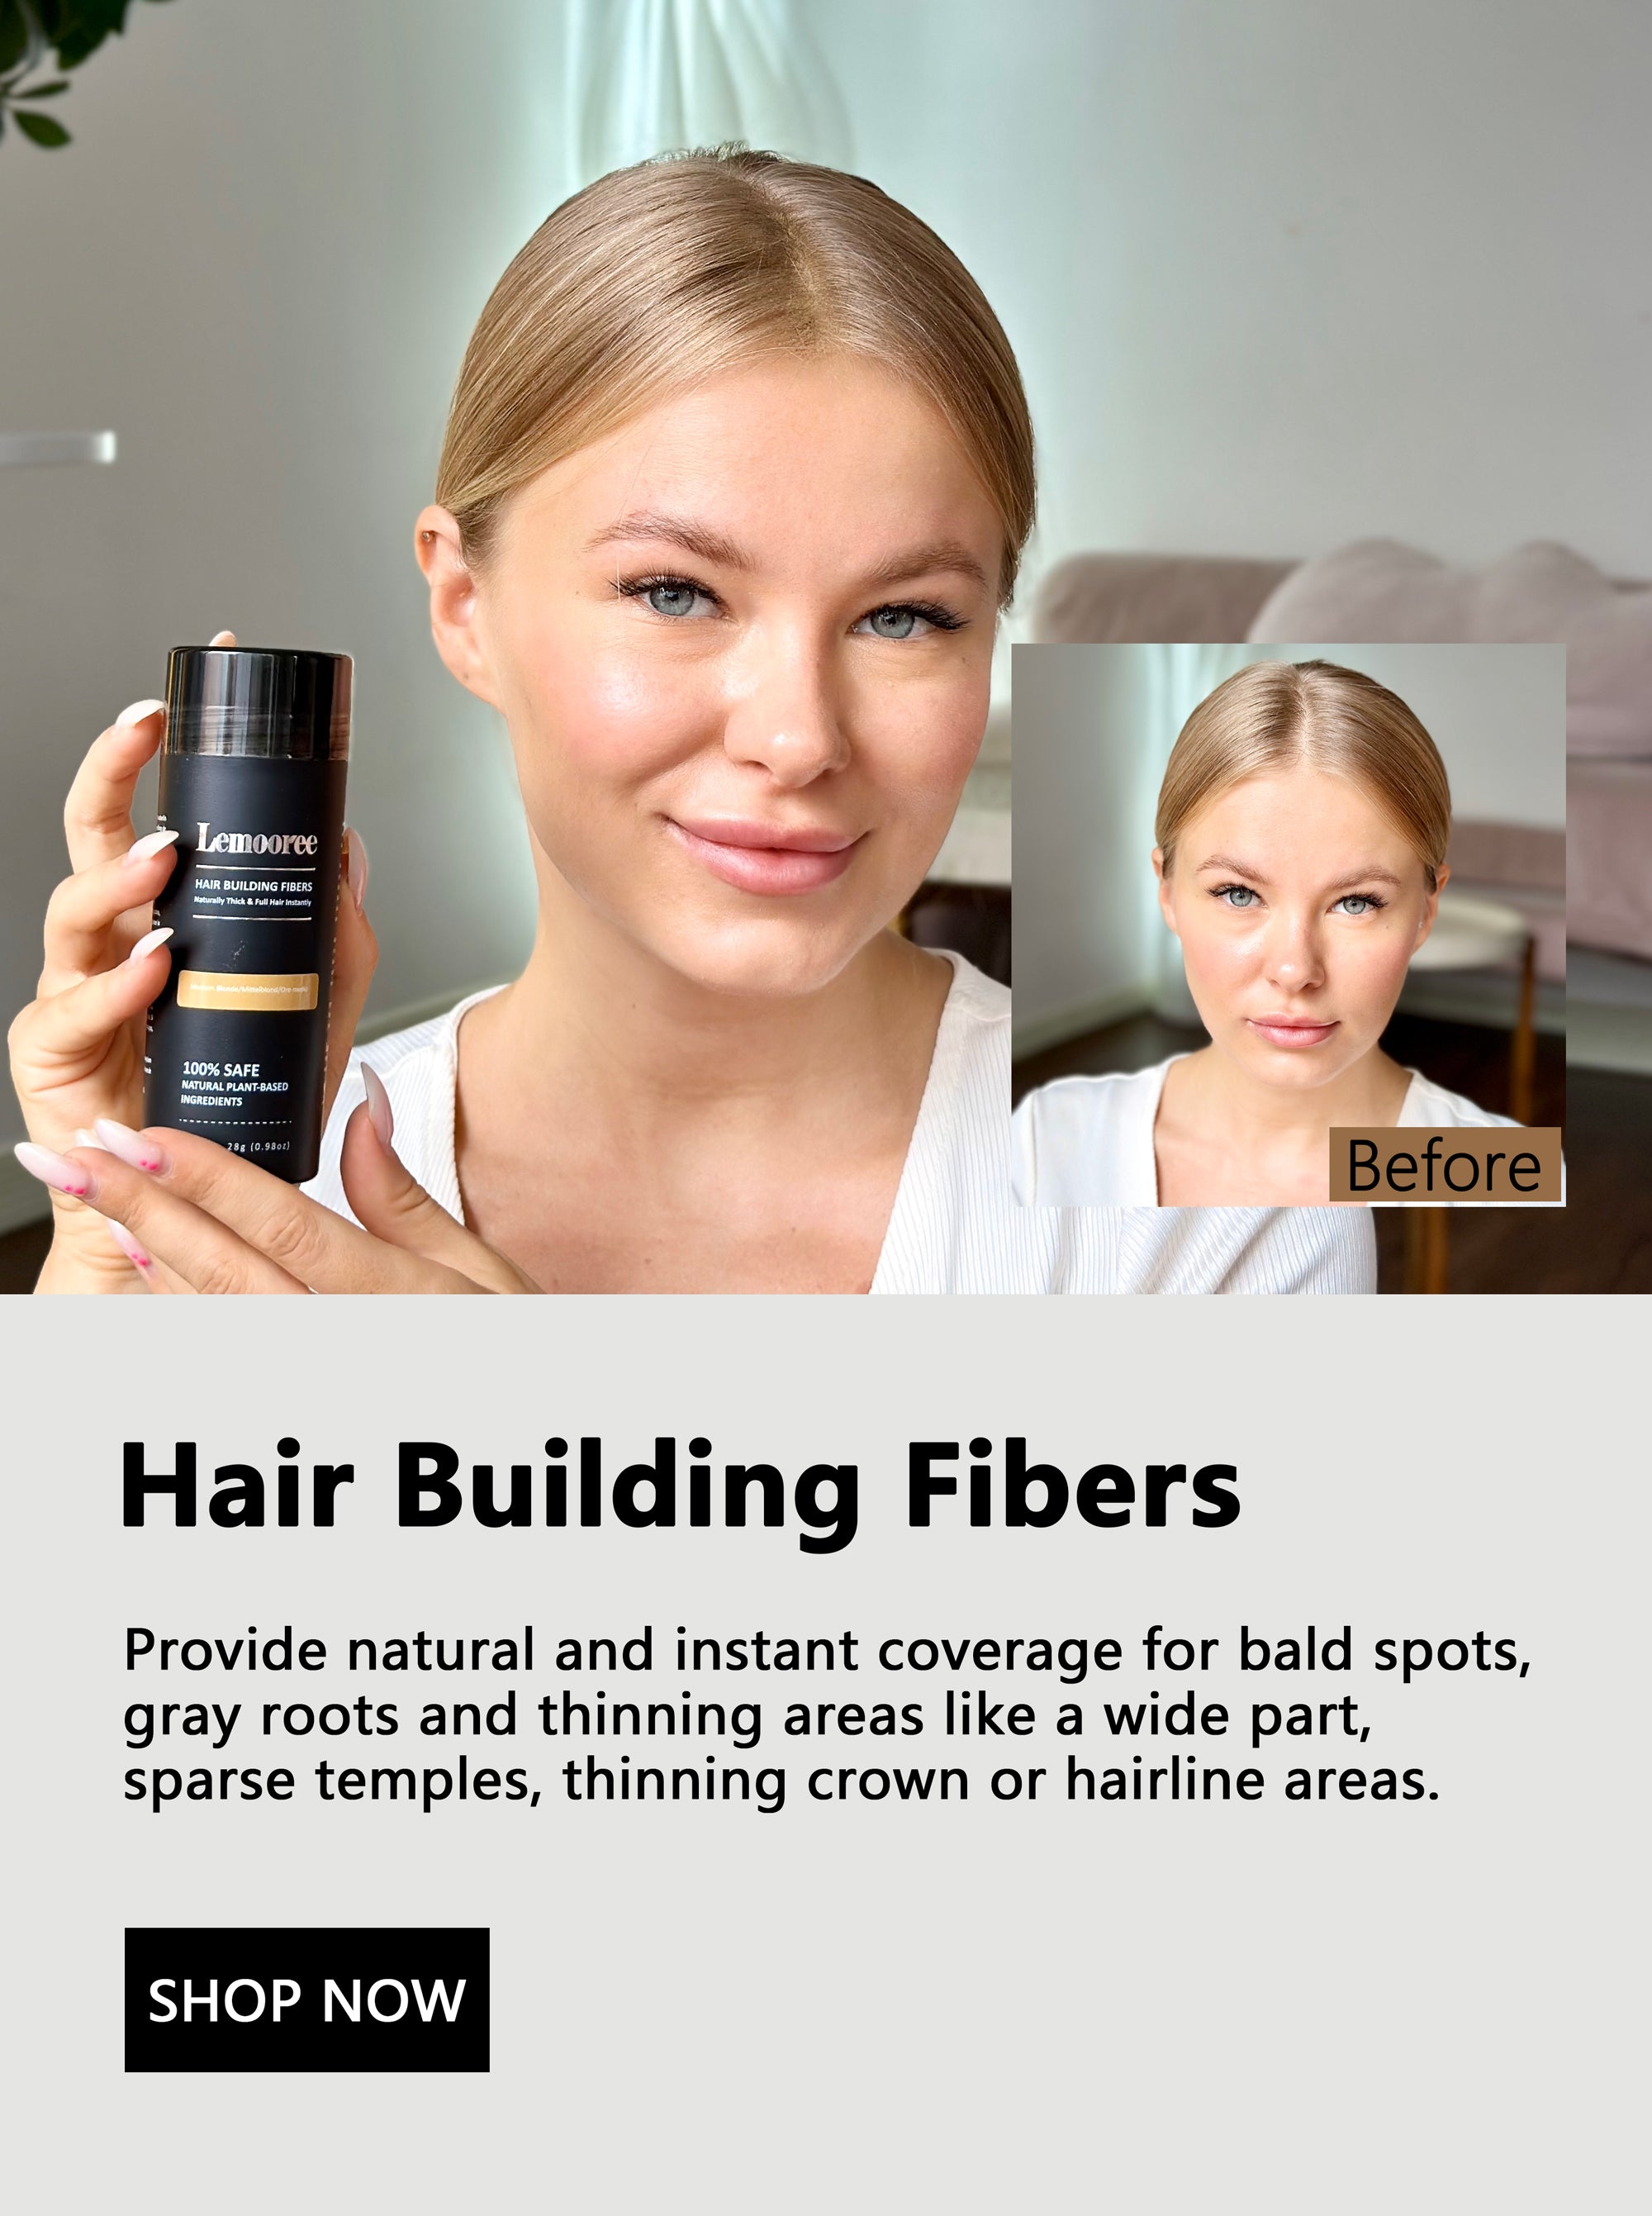 Before and after comparison images of using Lemooree Hair Building Fibers